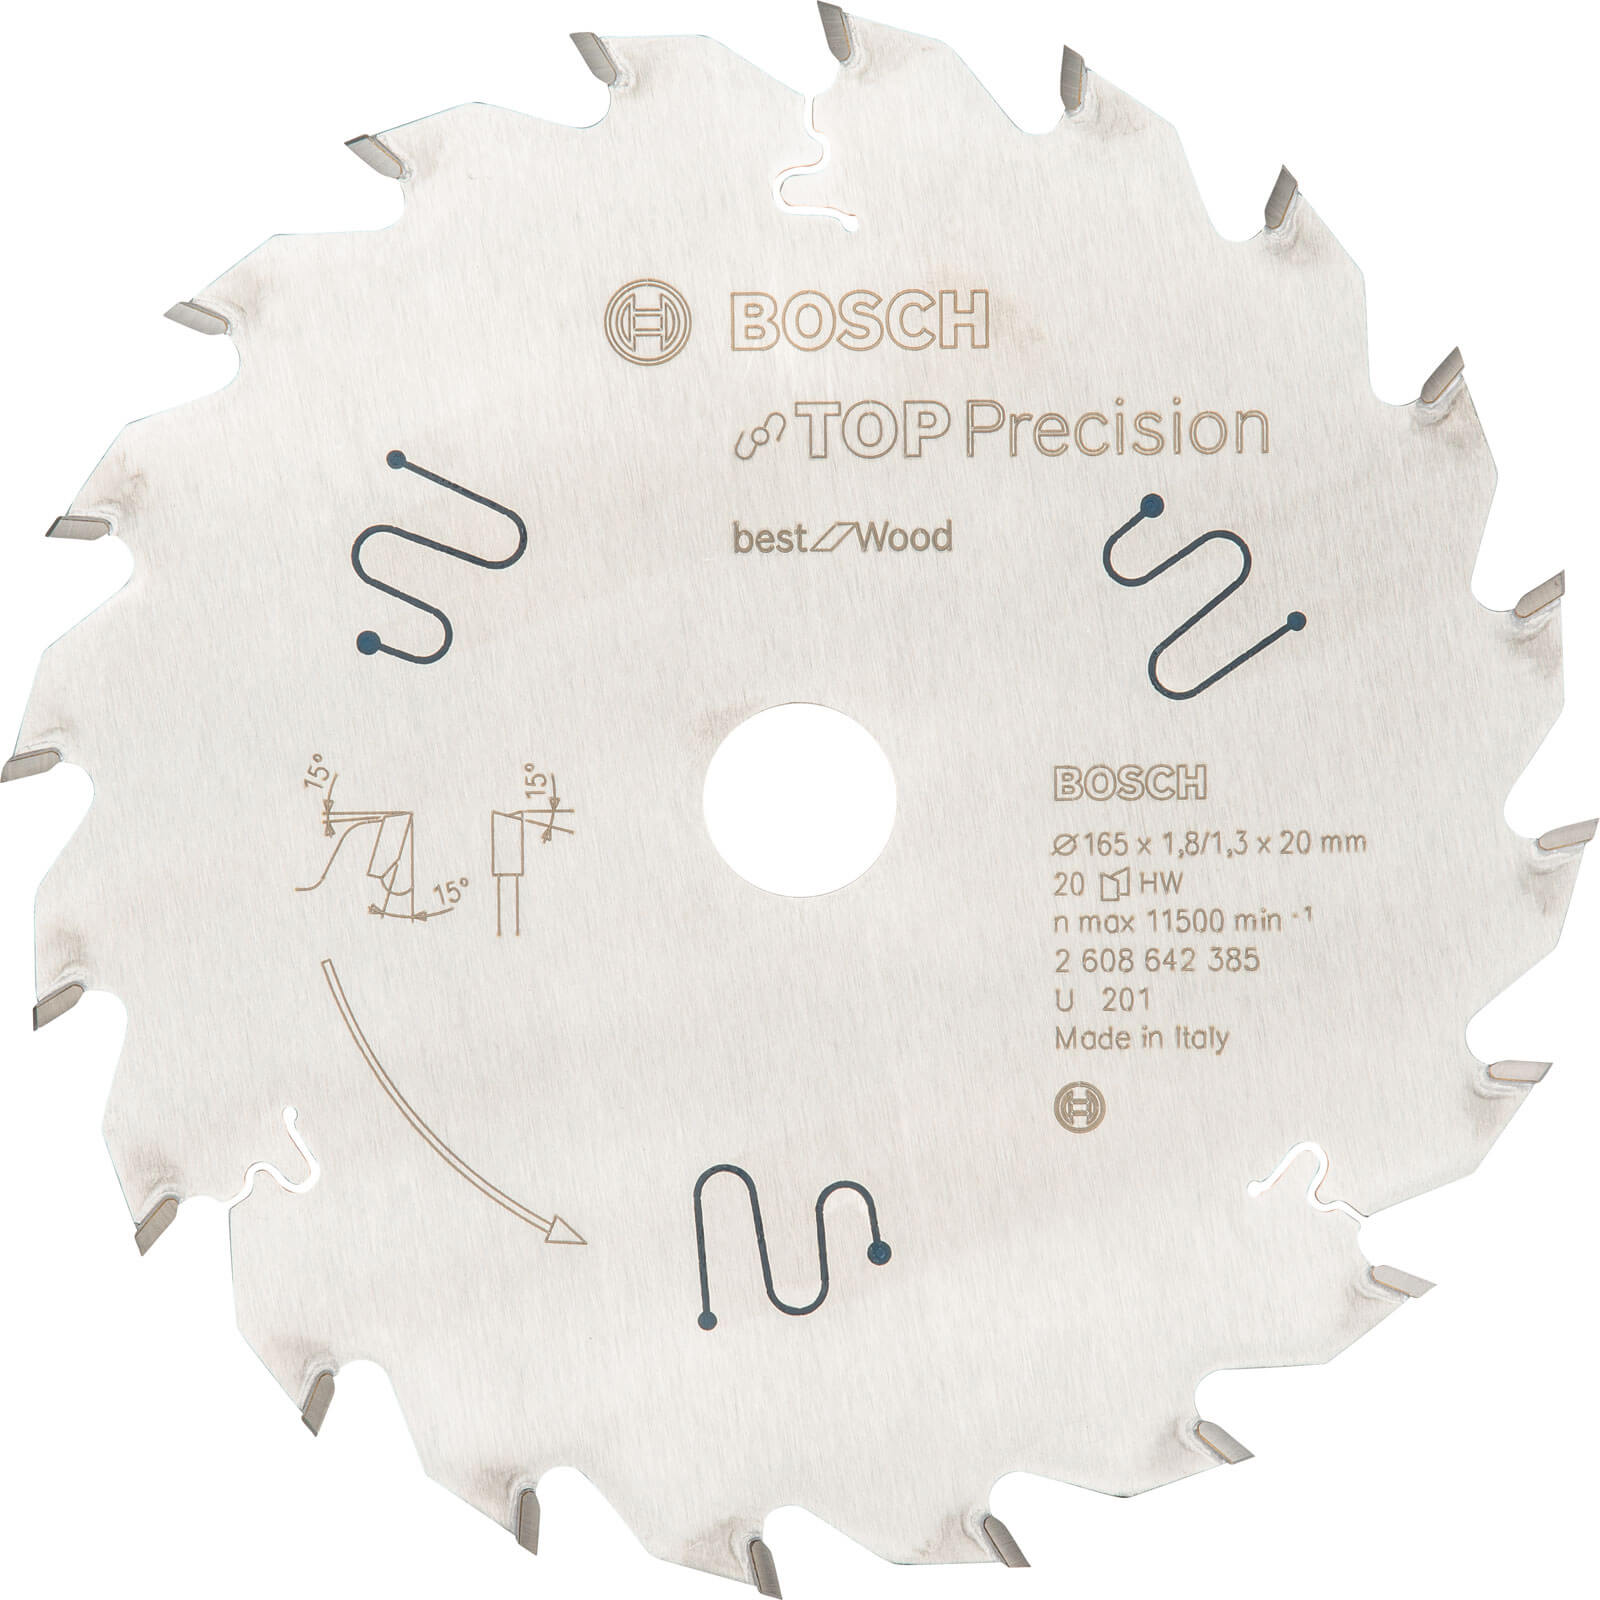 Photos - Power Tool Accessory Bosch Top Precision Wood Cutting Saw Blade 165mm 20T 20mm 